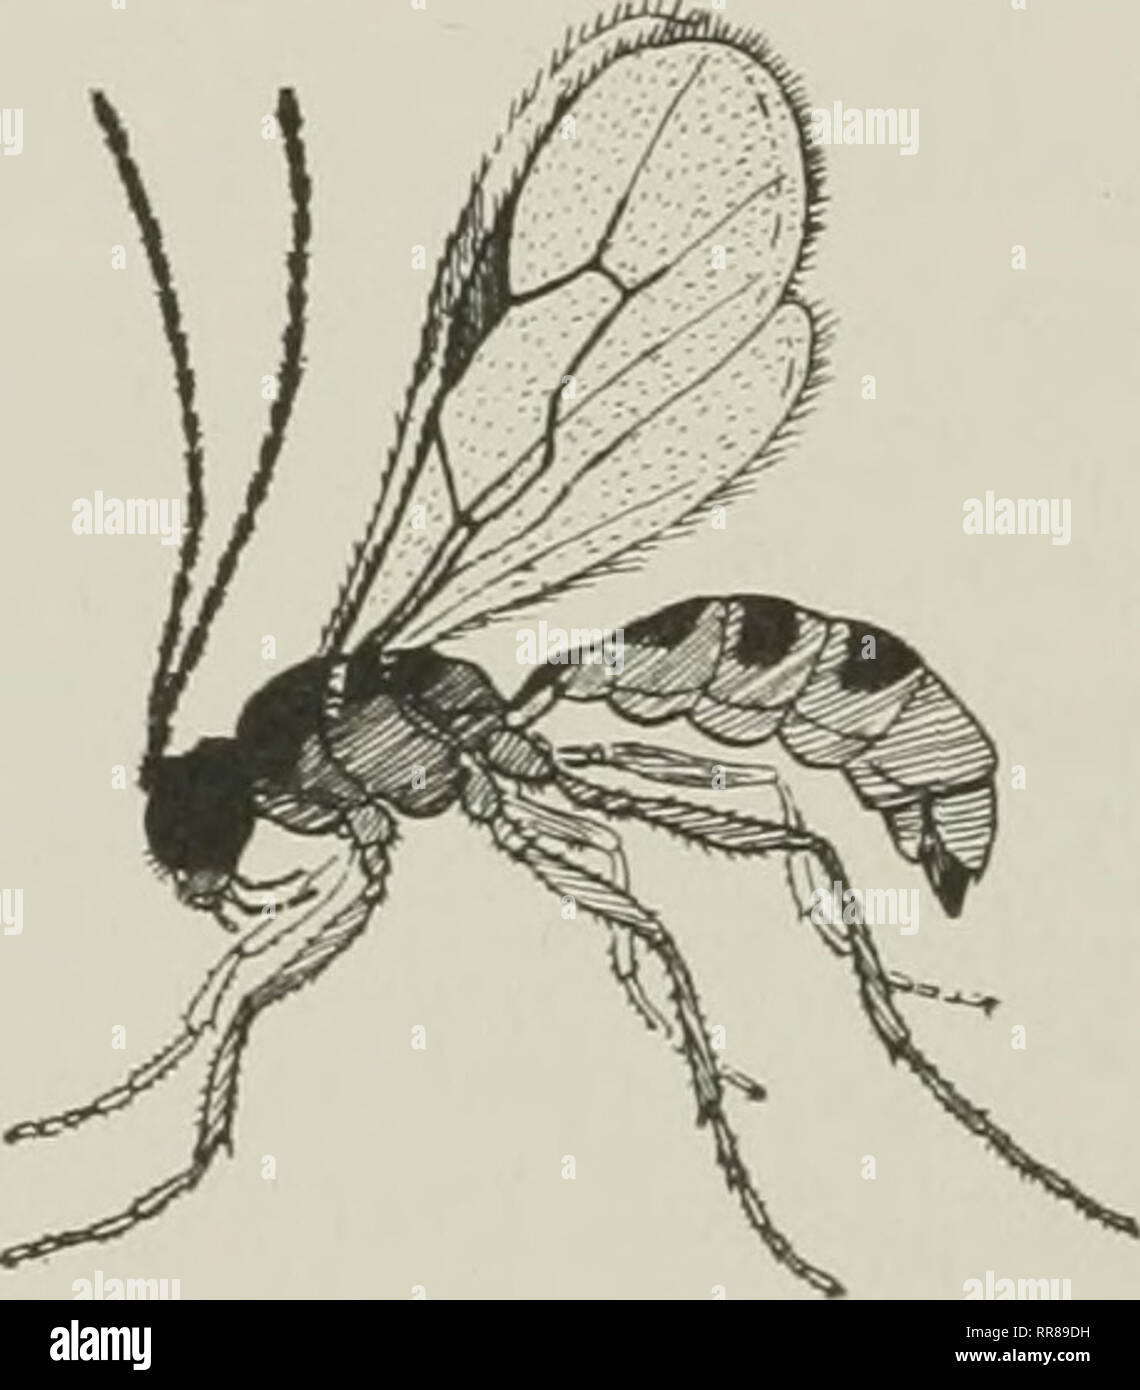 . Insects, their ways and means of living. Insects. Fig. 108. Aphidius, a com- mon small wasplike parasite of aphids Fig. 109. A female Aphidius inserting an egg into the body of a living aphis, where the egg hatches; the larva grows to ma- turity by feeding in the tissues of the aphis. (From Webster) (Fig. 109). Here the egg hatches and the young grub feeds on the juices of the aphid until it is itself hill-grown, by which time the aphid is exhausted and dead. Then the grub slits open the lower wall of the hollow corpse and spins a web between the lips ot the opening and against the surface o Stock Photo